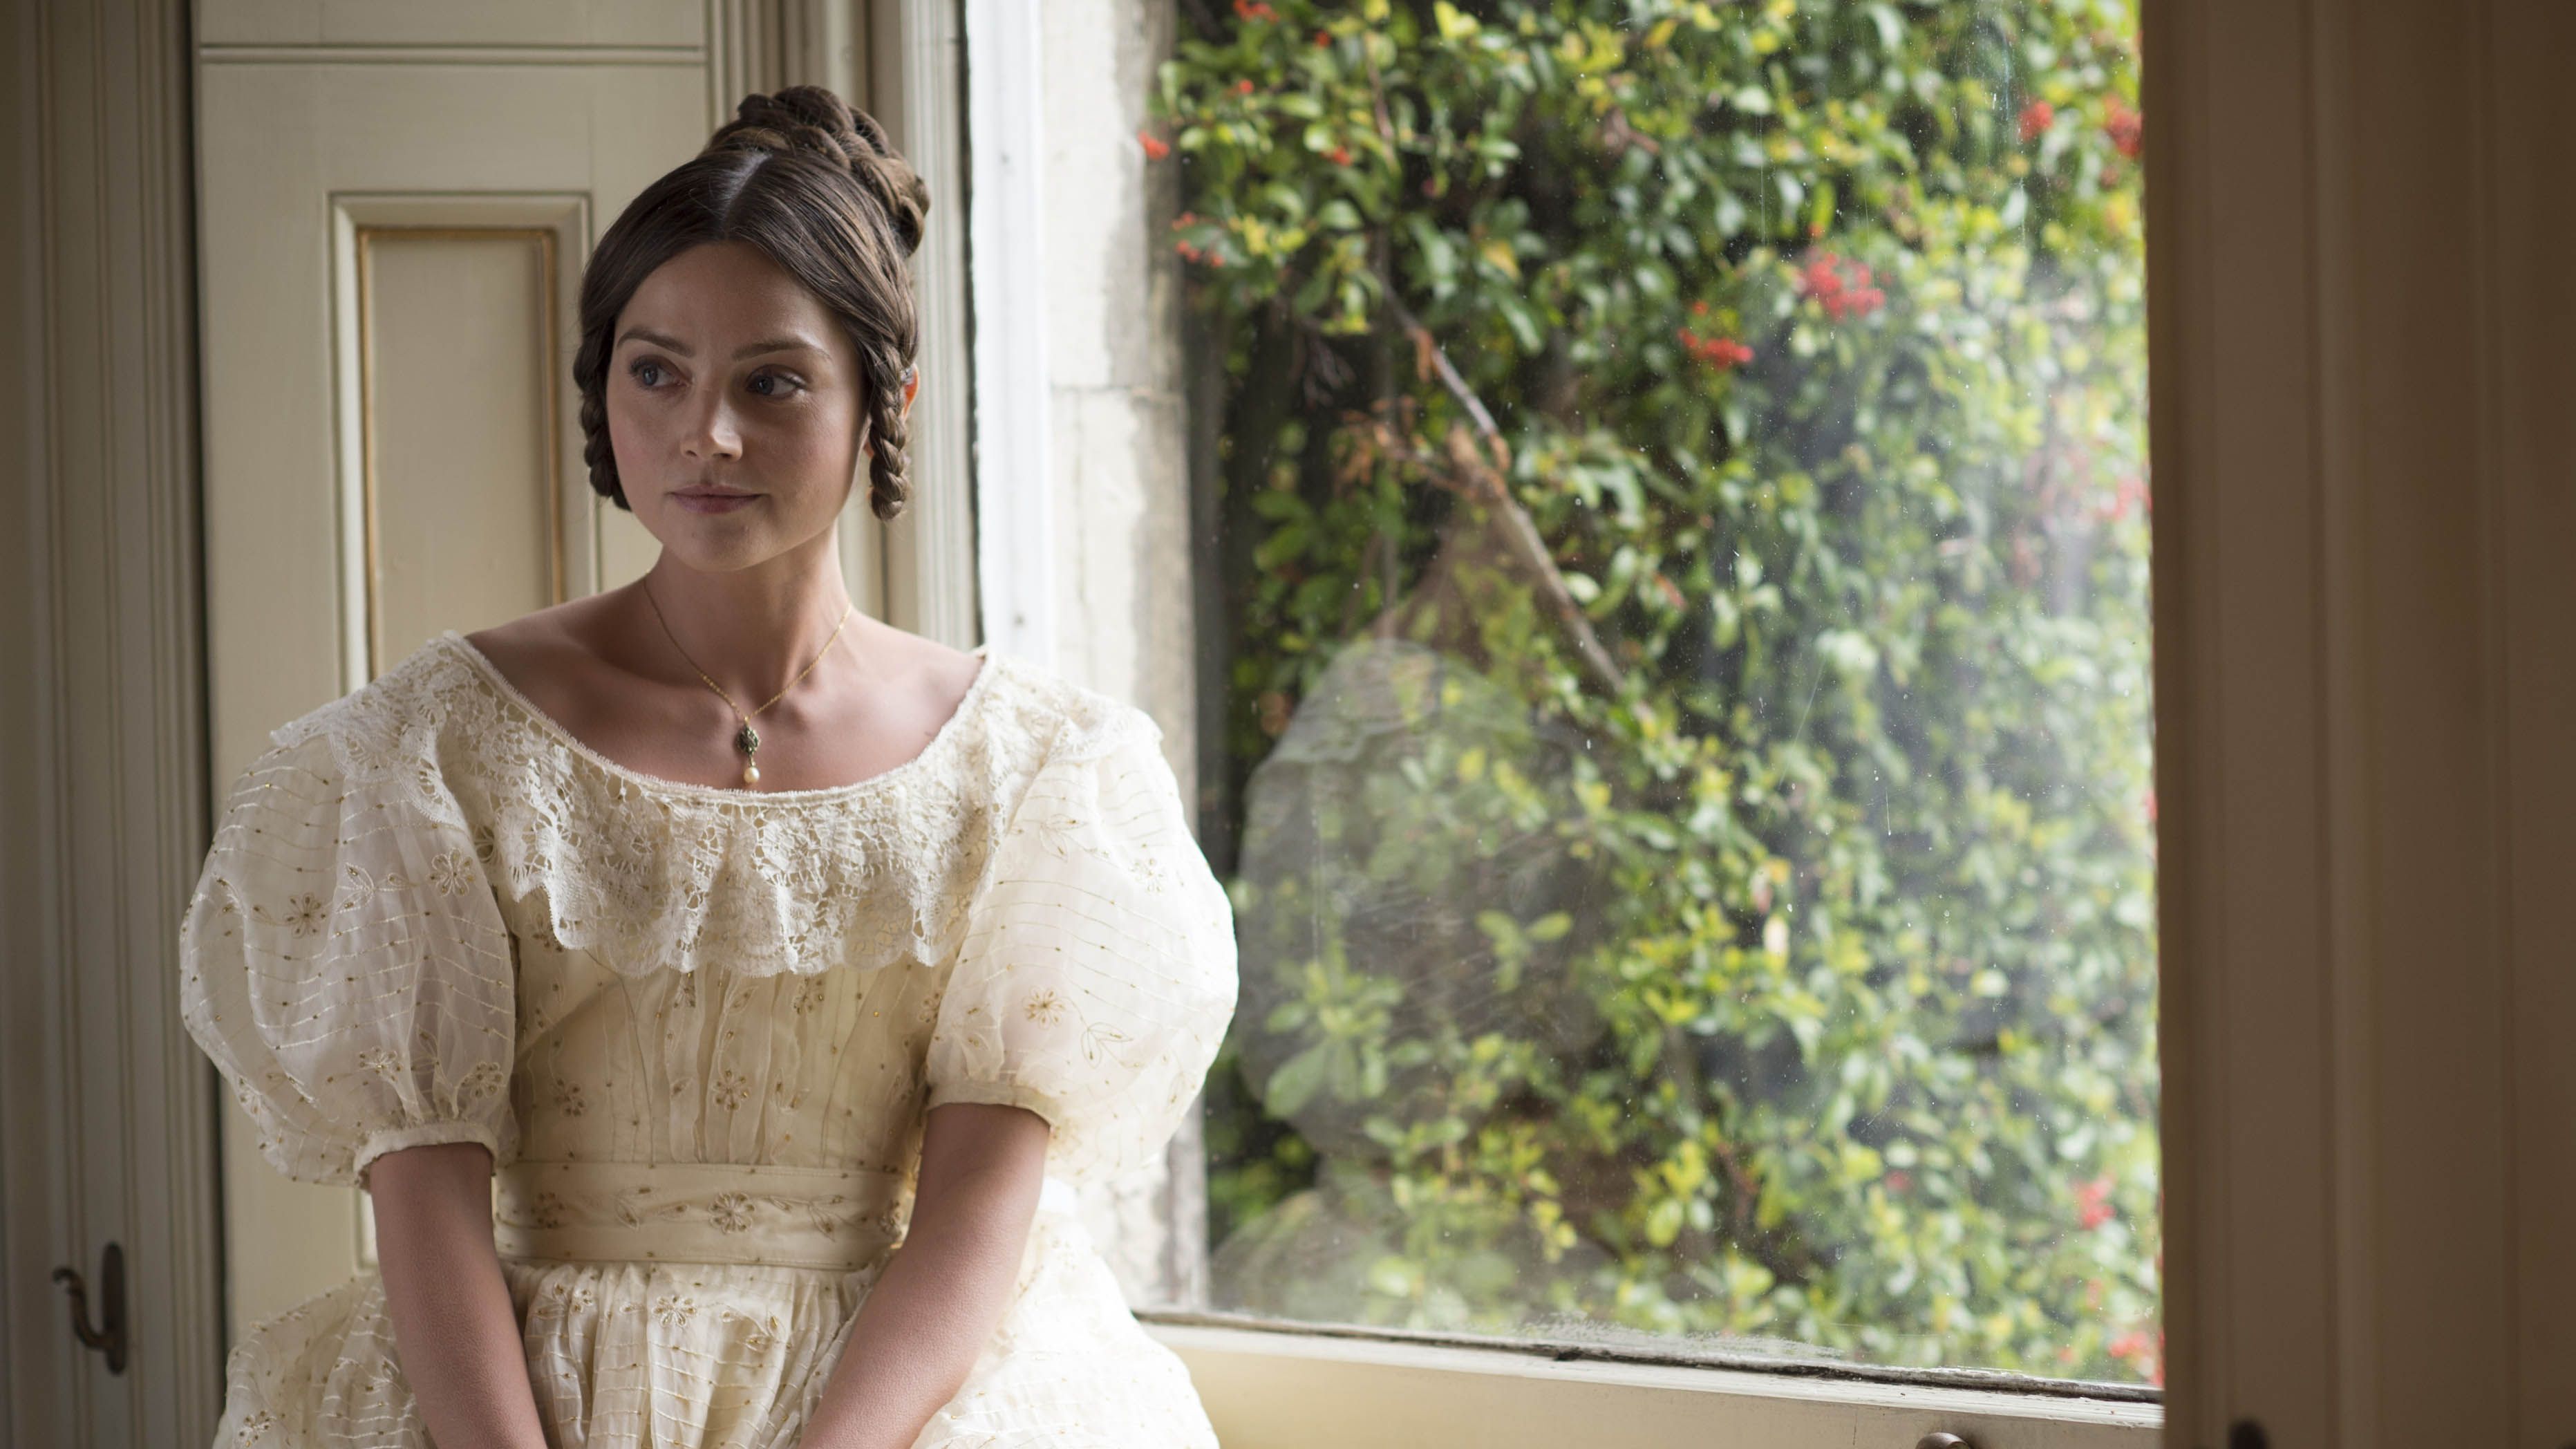 Single Victorian Era Women Reveal Why They Never Married